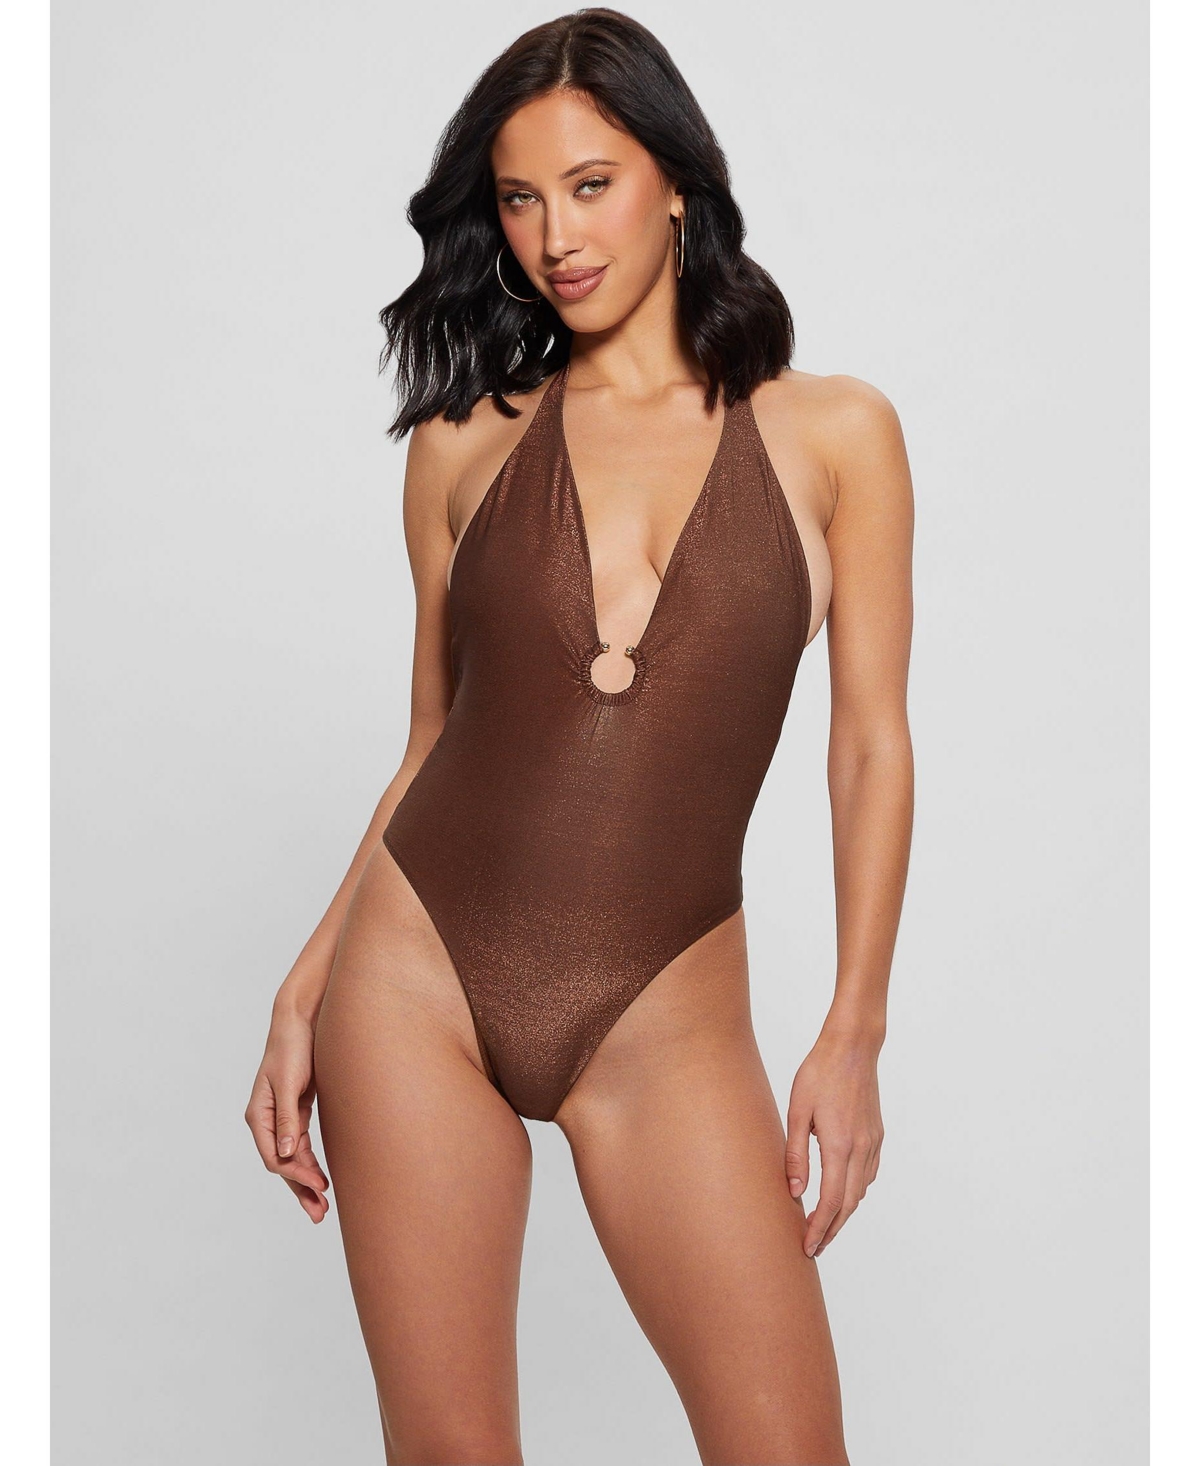 Women's Eco One-Piece Swimsuit - Pure white